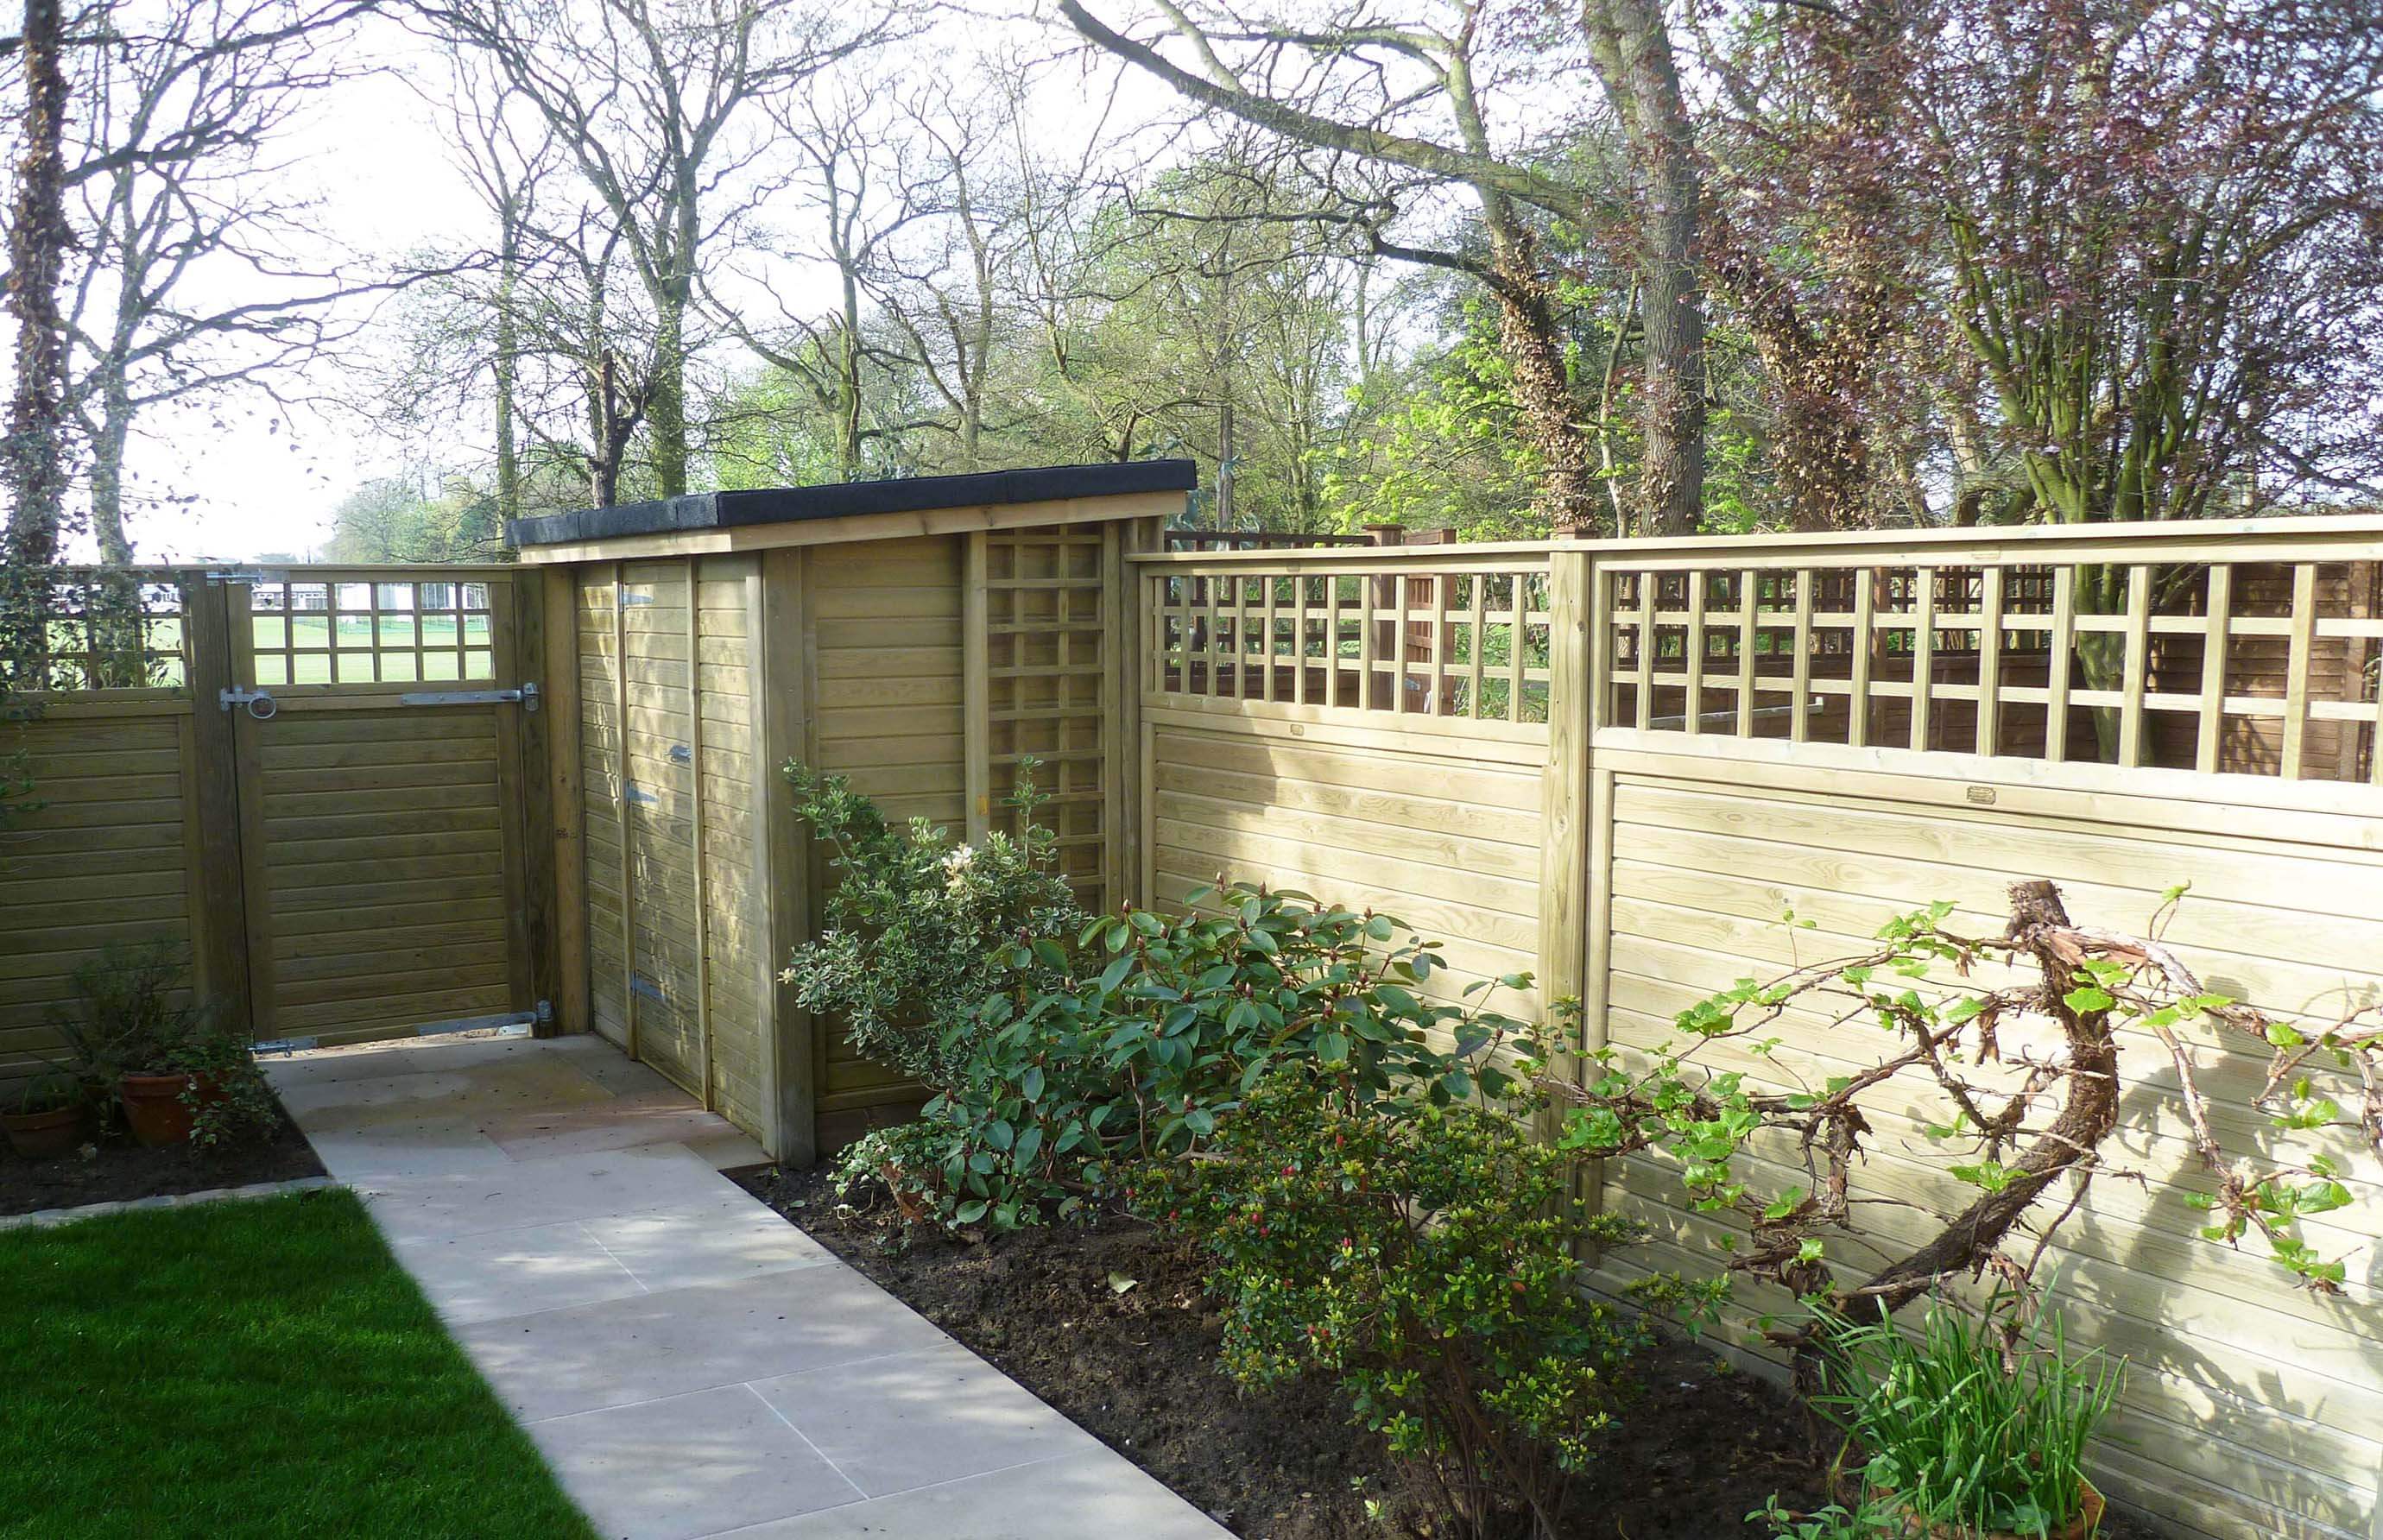 Fence with trellis gate and shed matching